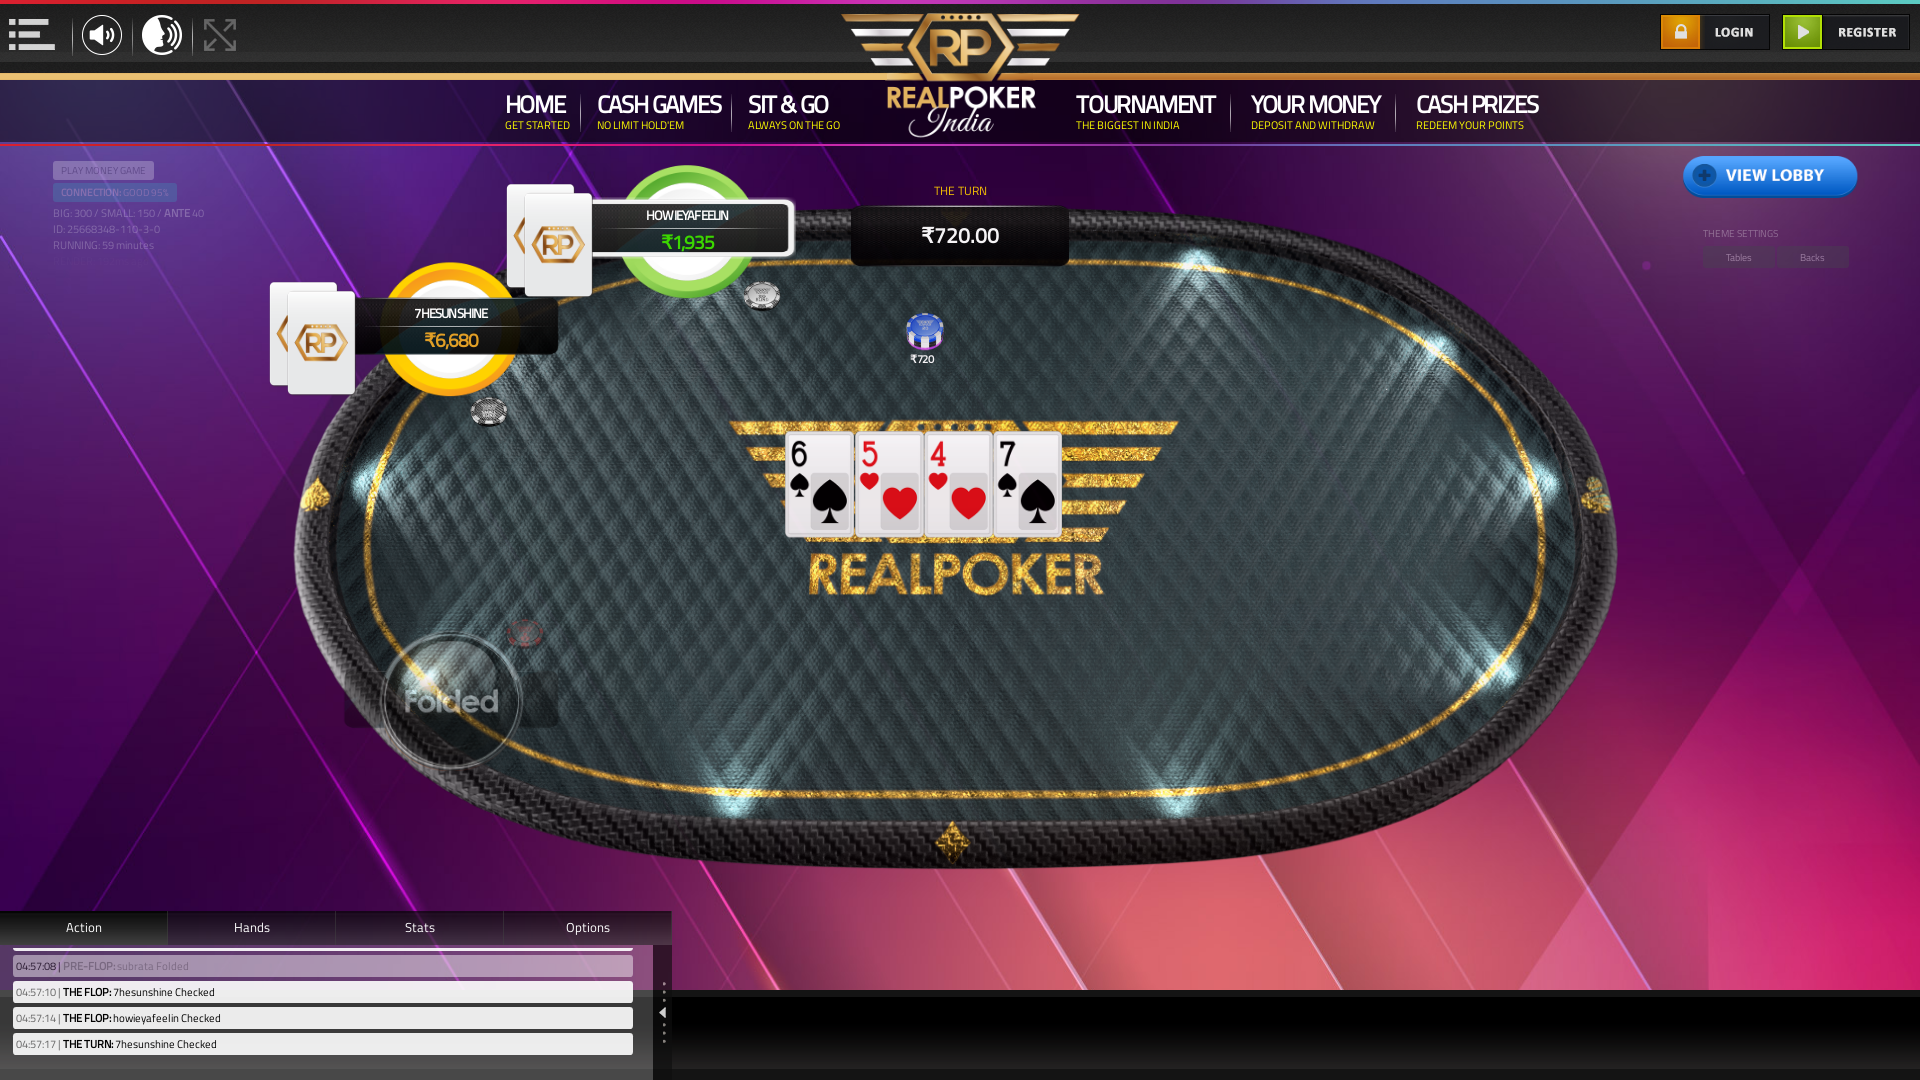 Online poker on a 10 player table in the 58th minute match up